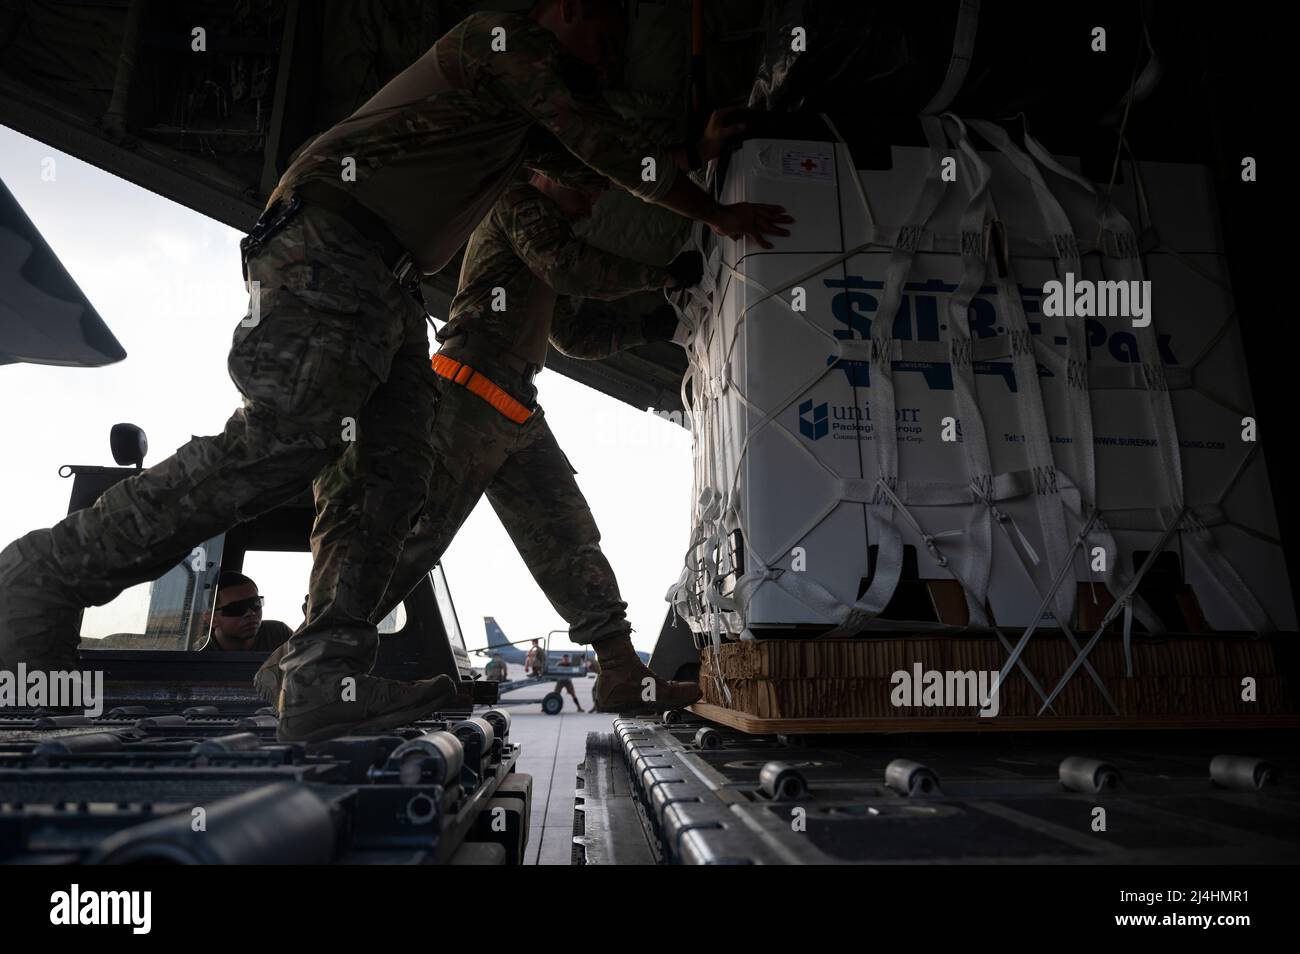 U.S. Airmen load cargo onto an MC-130J Commando II at Al Udeid Air Base, Qatar, Nov. 30, 2021. The MC-130J provides infiltration, exfiltration and resupply of special operations forces and equipment in hostile or denied territory. Secondary missions include psychological operations, and helicopter and vertical lift air refueling. (U.S. Air Force photo by Staff Sgt. Joseph Pick) Stock Photo